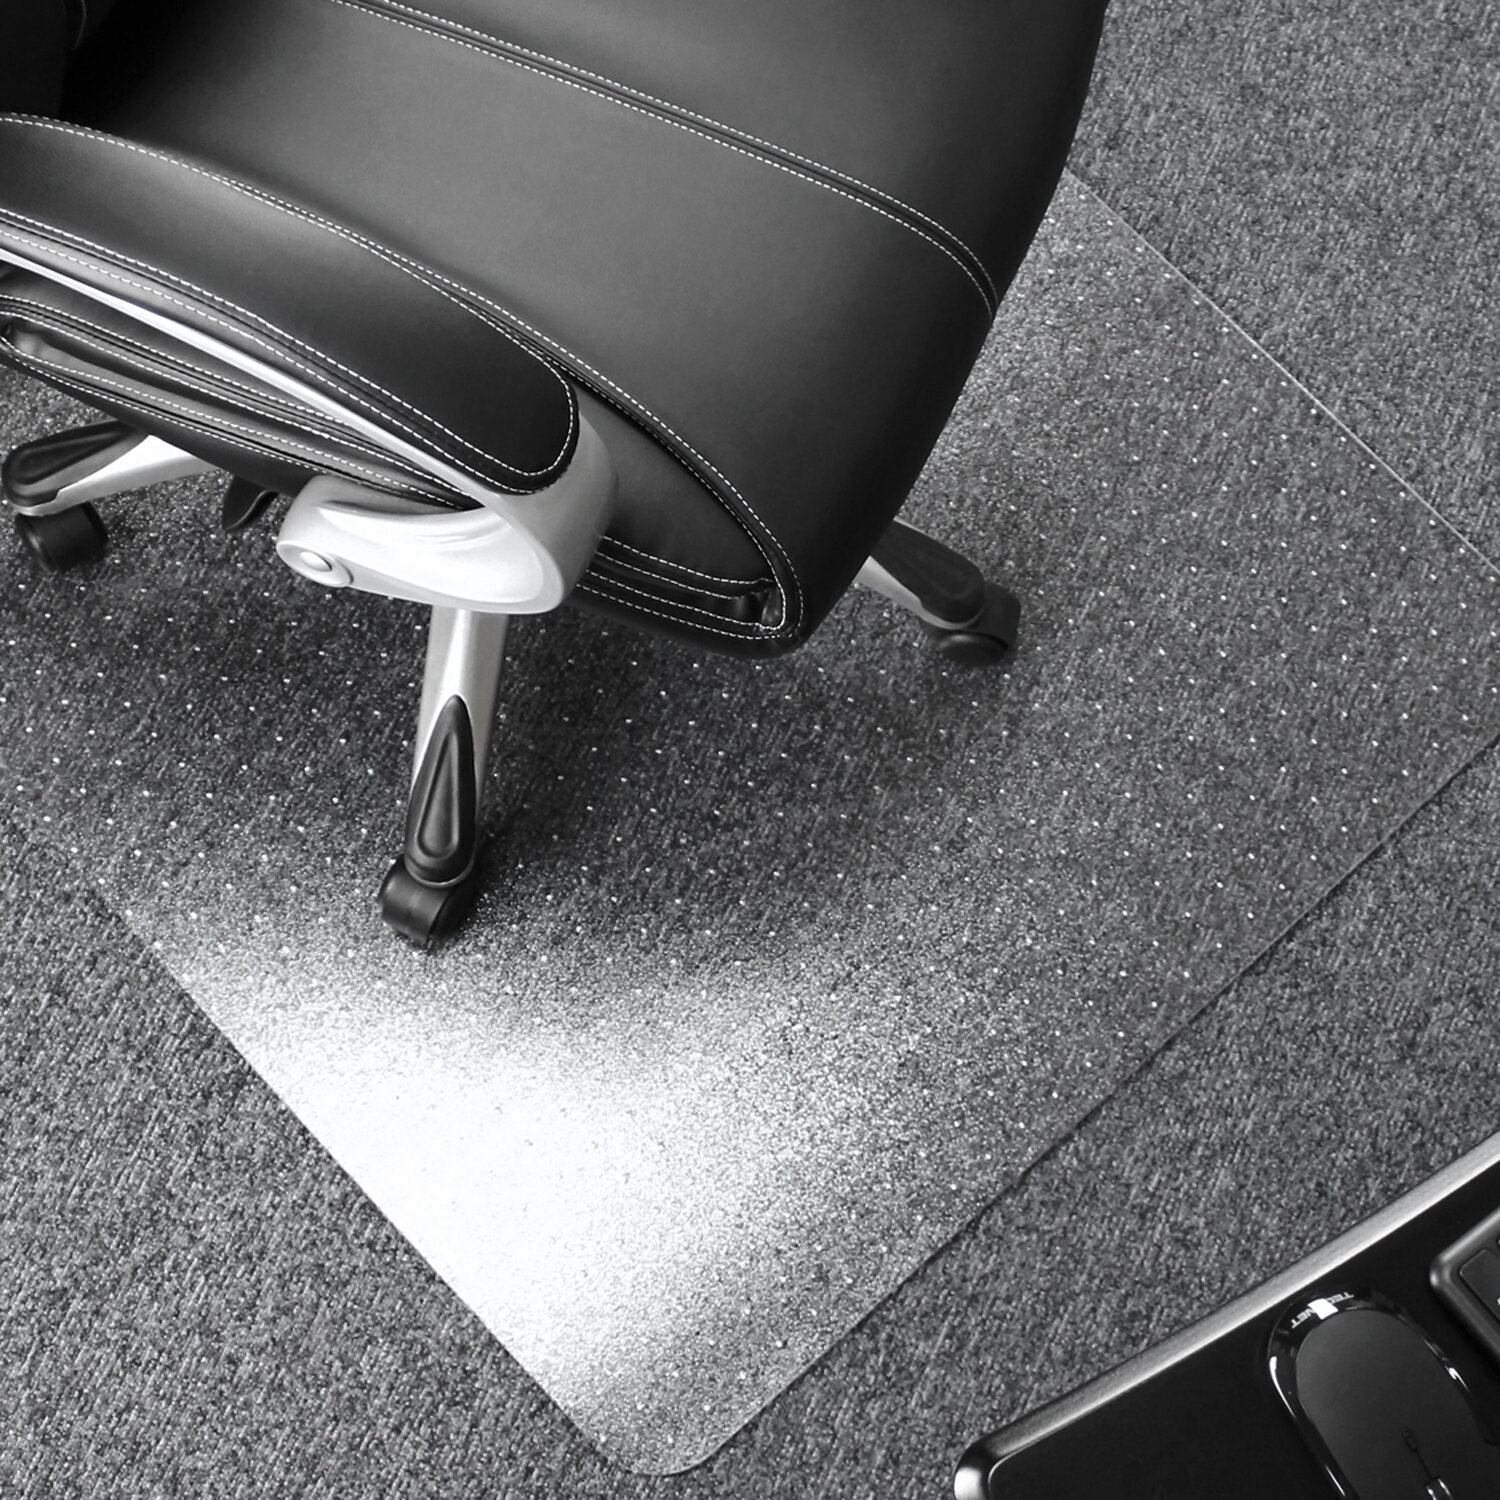 Floortex ultimat polycarbonate chair mat for low medium pile carpets Floortex Ultimat Polycarbonate Chair Mat For Low Medium Pile Carpets Up To 12 48 X 60 Clear Office Depot